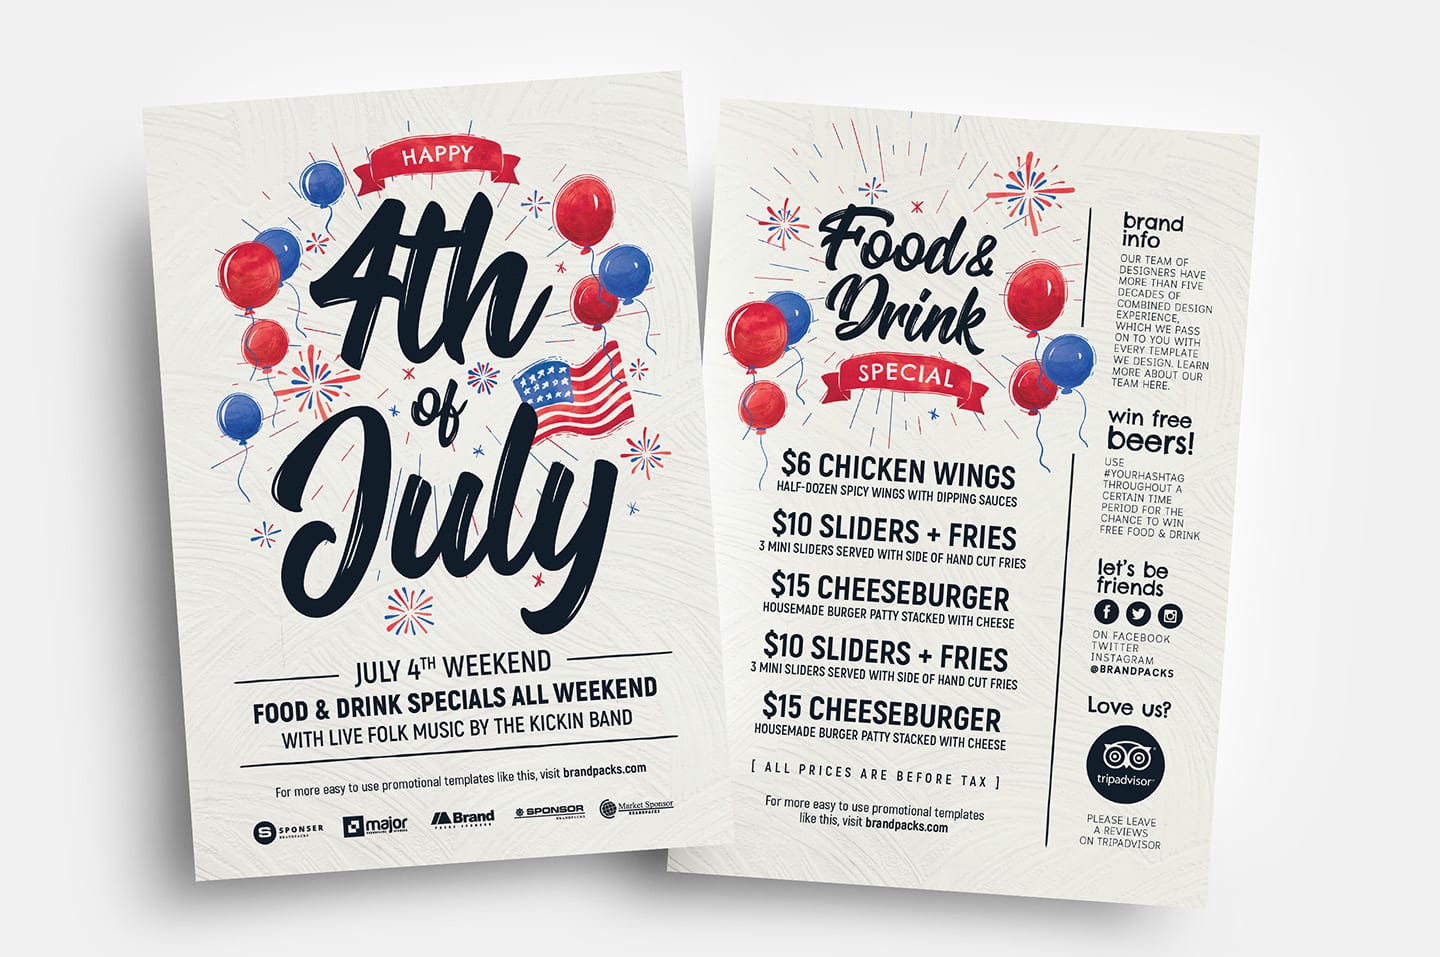 4th of July Flyer Templates